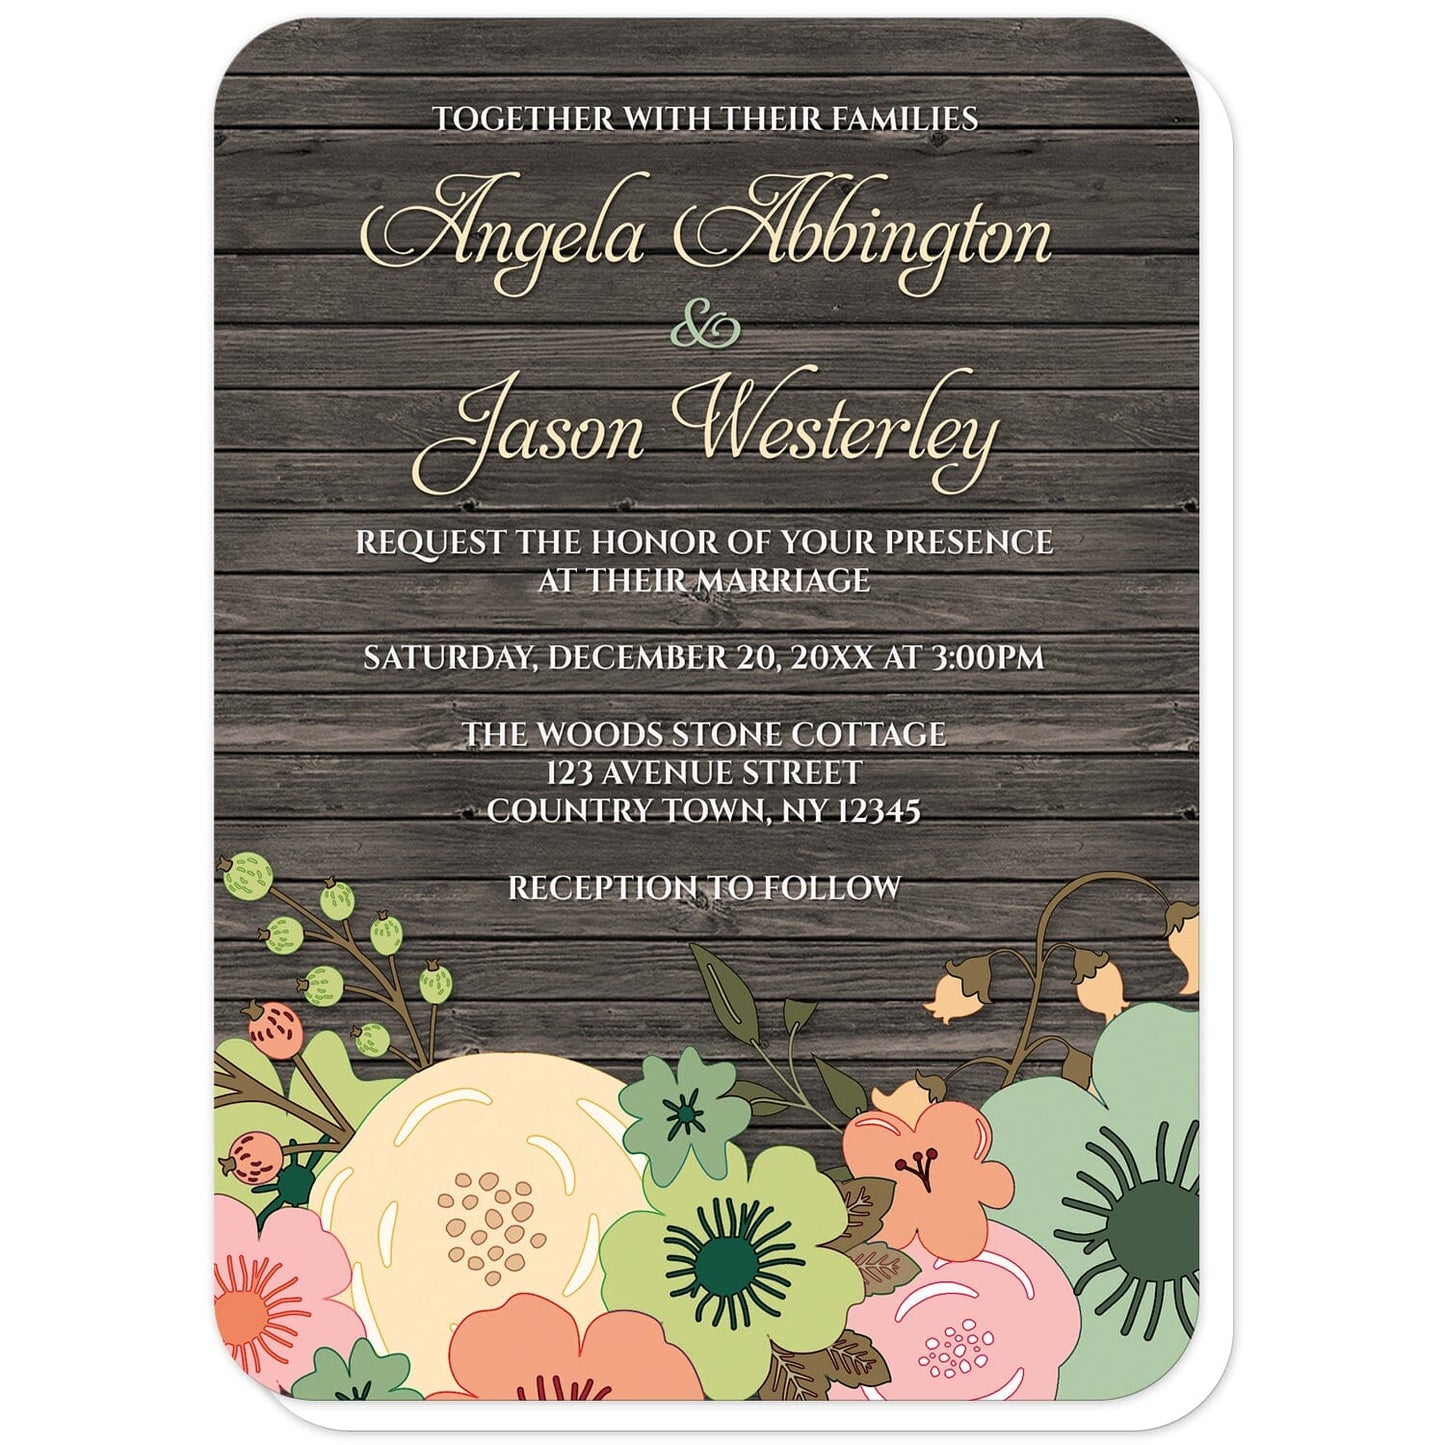 Rustic Orange Teal Floral Wood Wedding Invitations (with rounded corners) at Artistically Invited. Rustic orange teal floral wood wedding invitations designed with a southern country orange, beige, and teal floral theme with pink and green accent flowers. This floral illustration is printed along the bottom of the invitations over a dark brown rustic wood pattern background. Your personalized marriage celebration details are custom printed in beige and white over the wood design above the flowers.